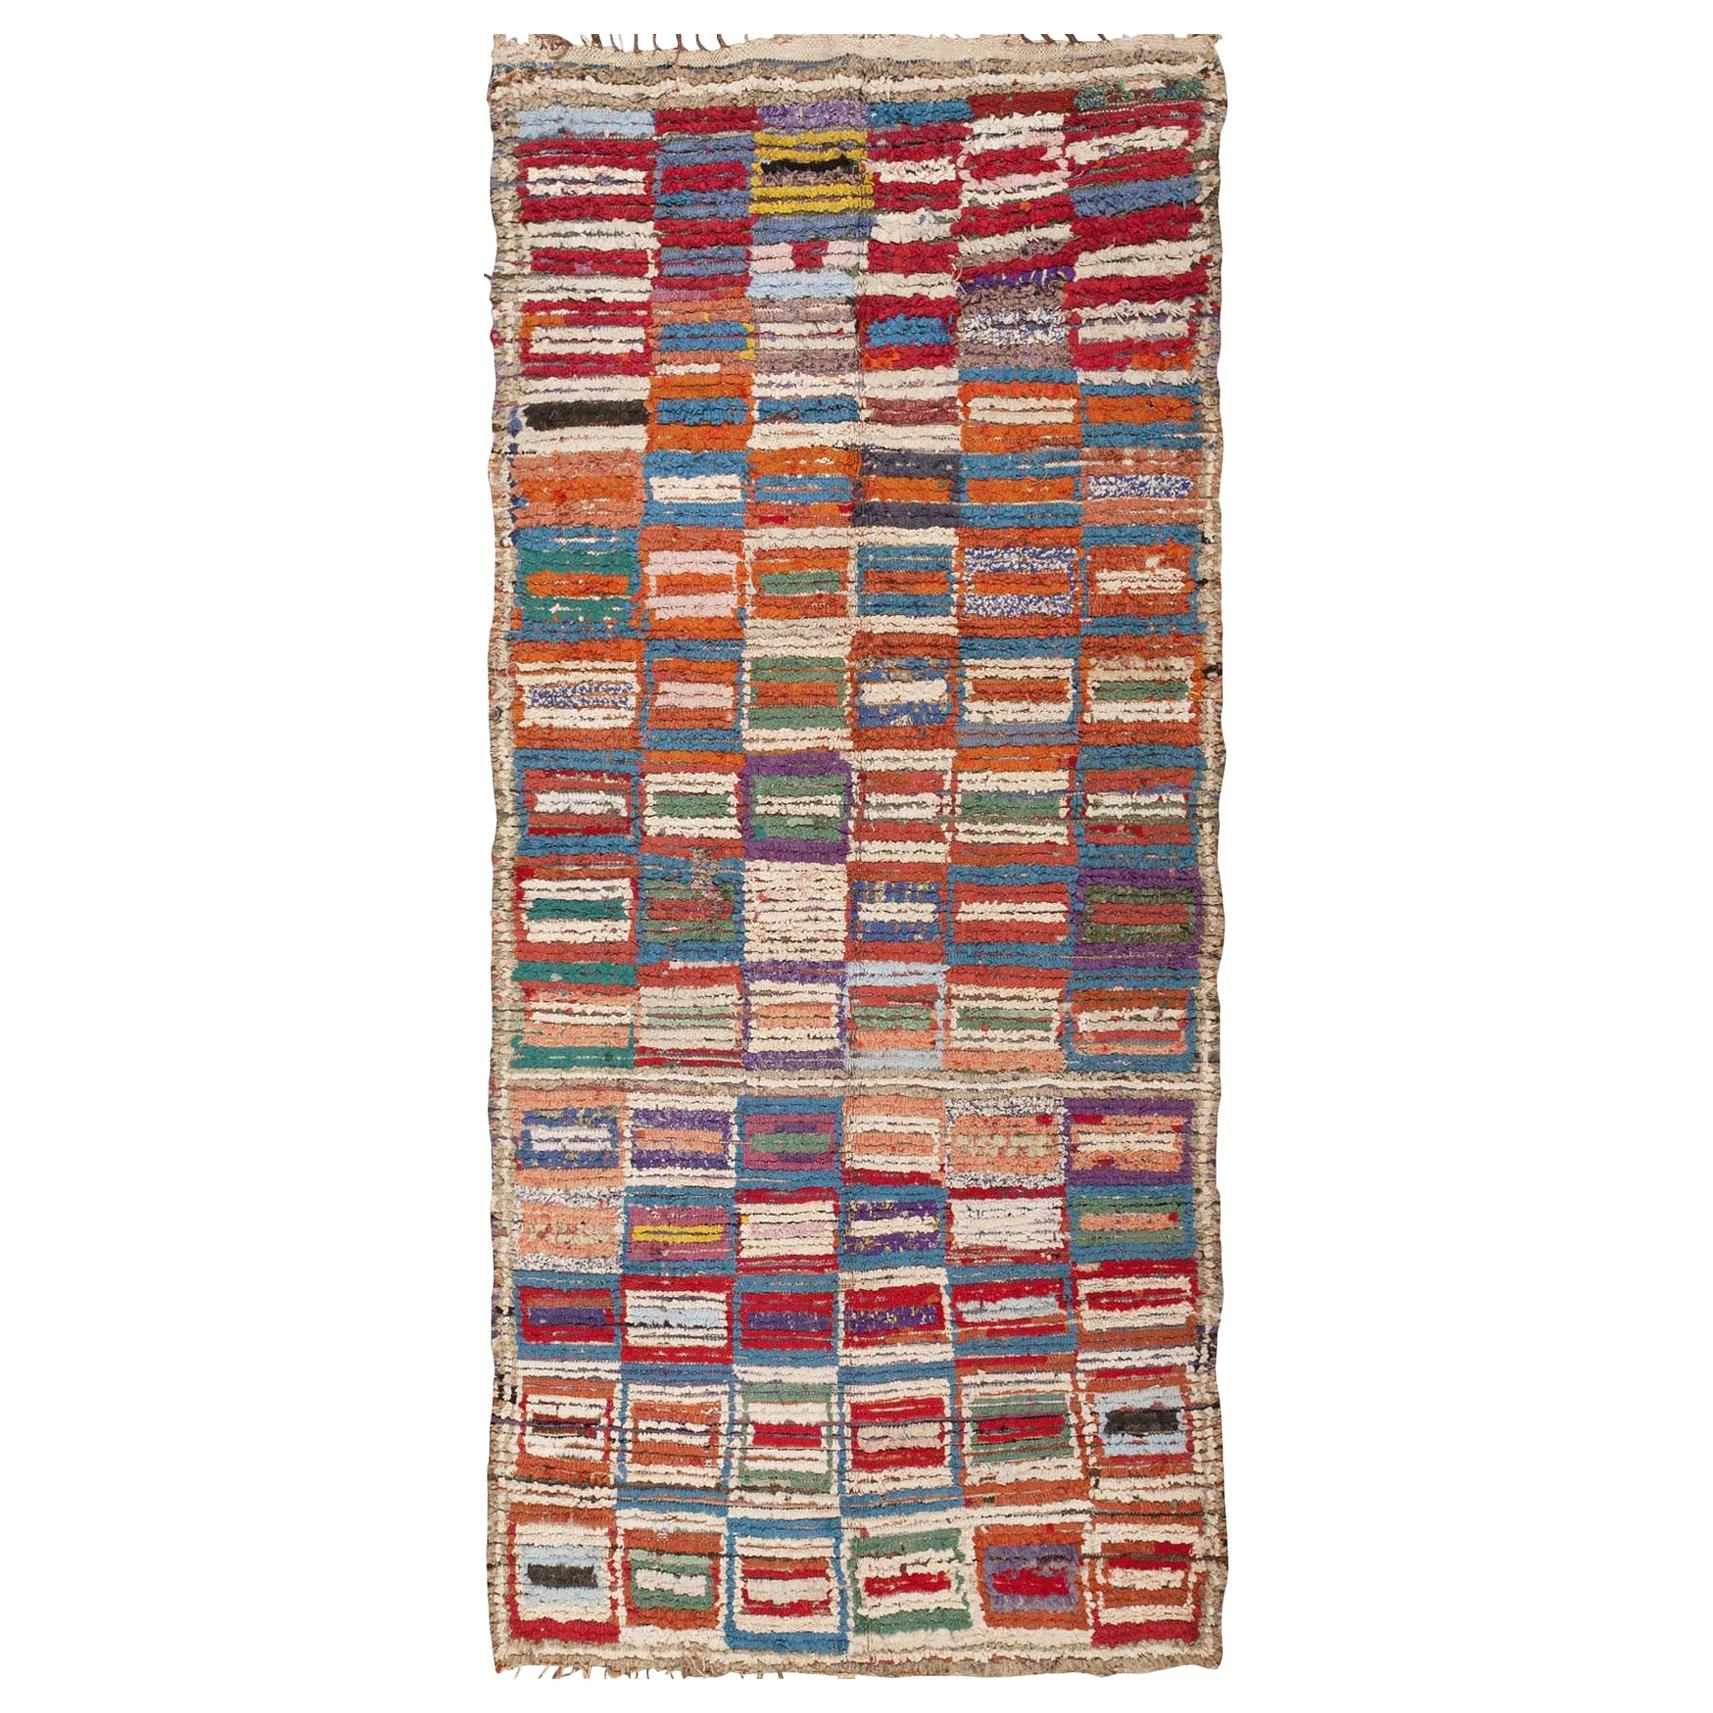 Vintage Mid-Century Moroccan Rag Rug. Size: 3 ft 10 in x 8 ft 8 in